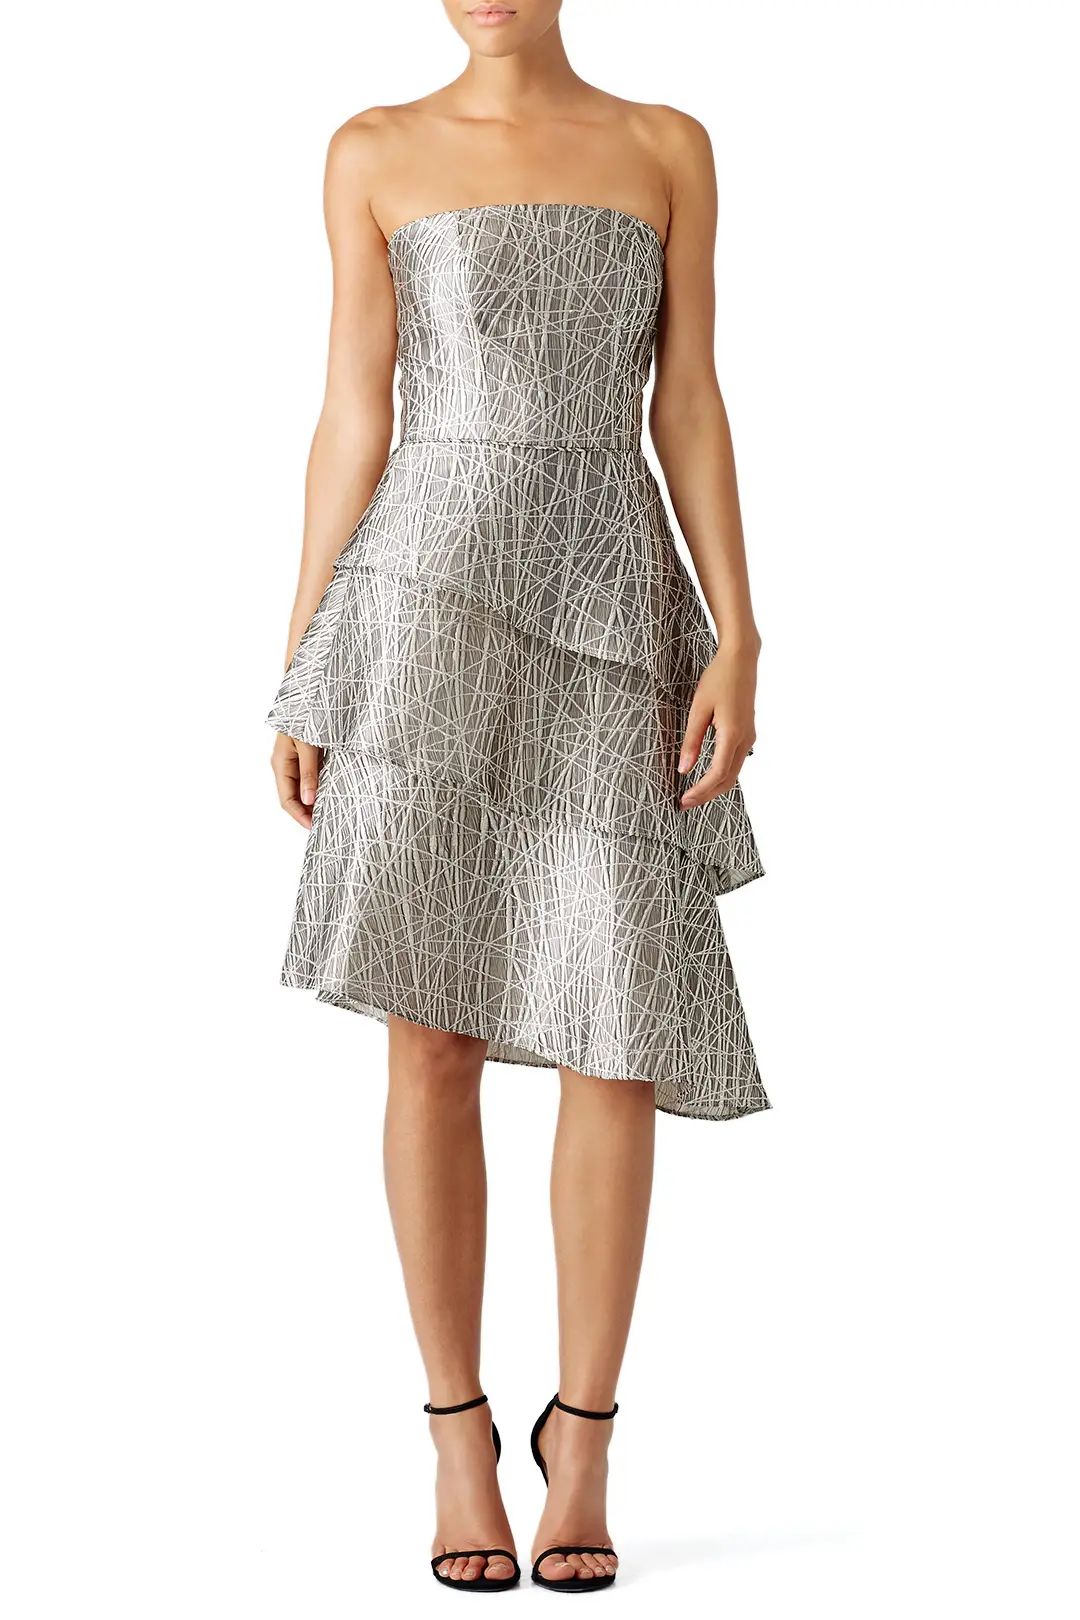 Ava Maria Cocktail Dress | Rent the Runway